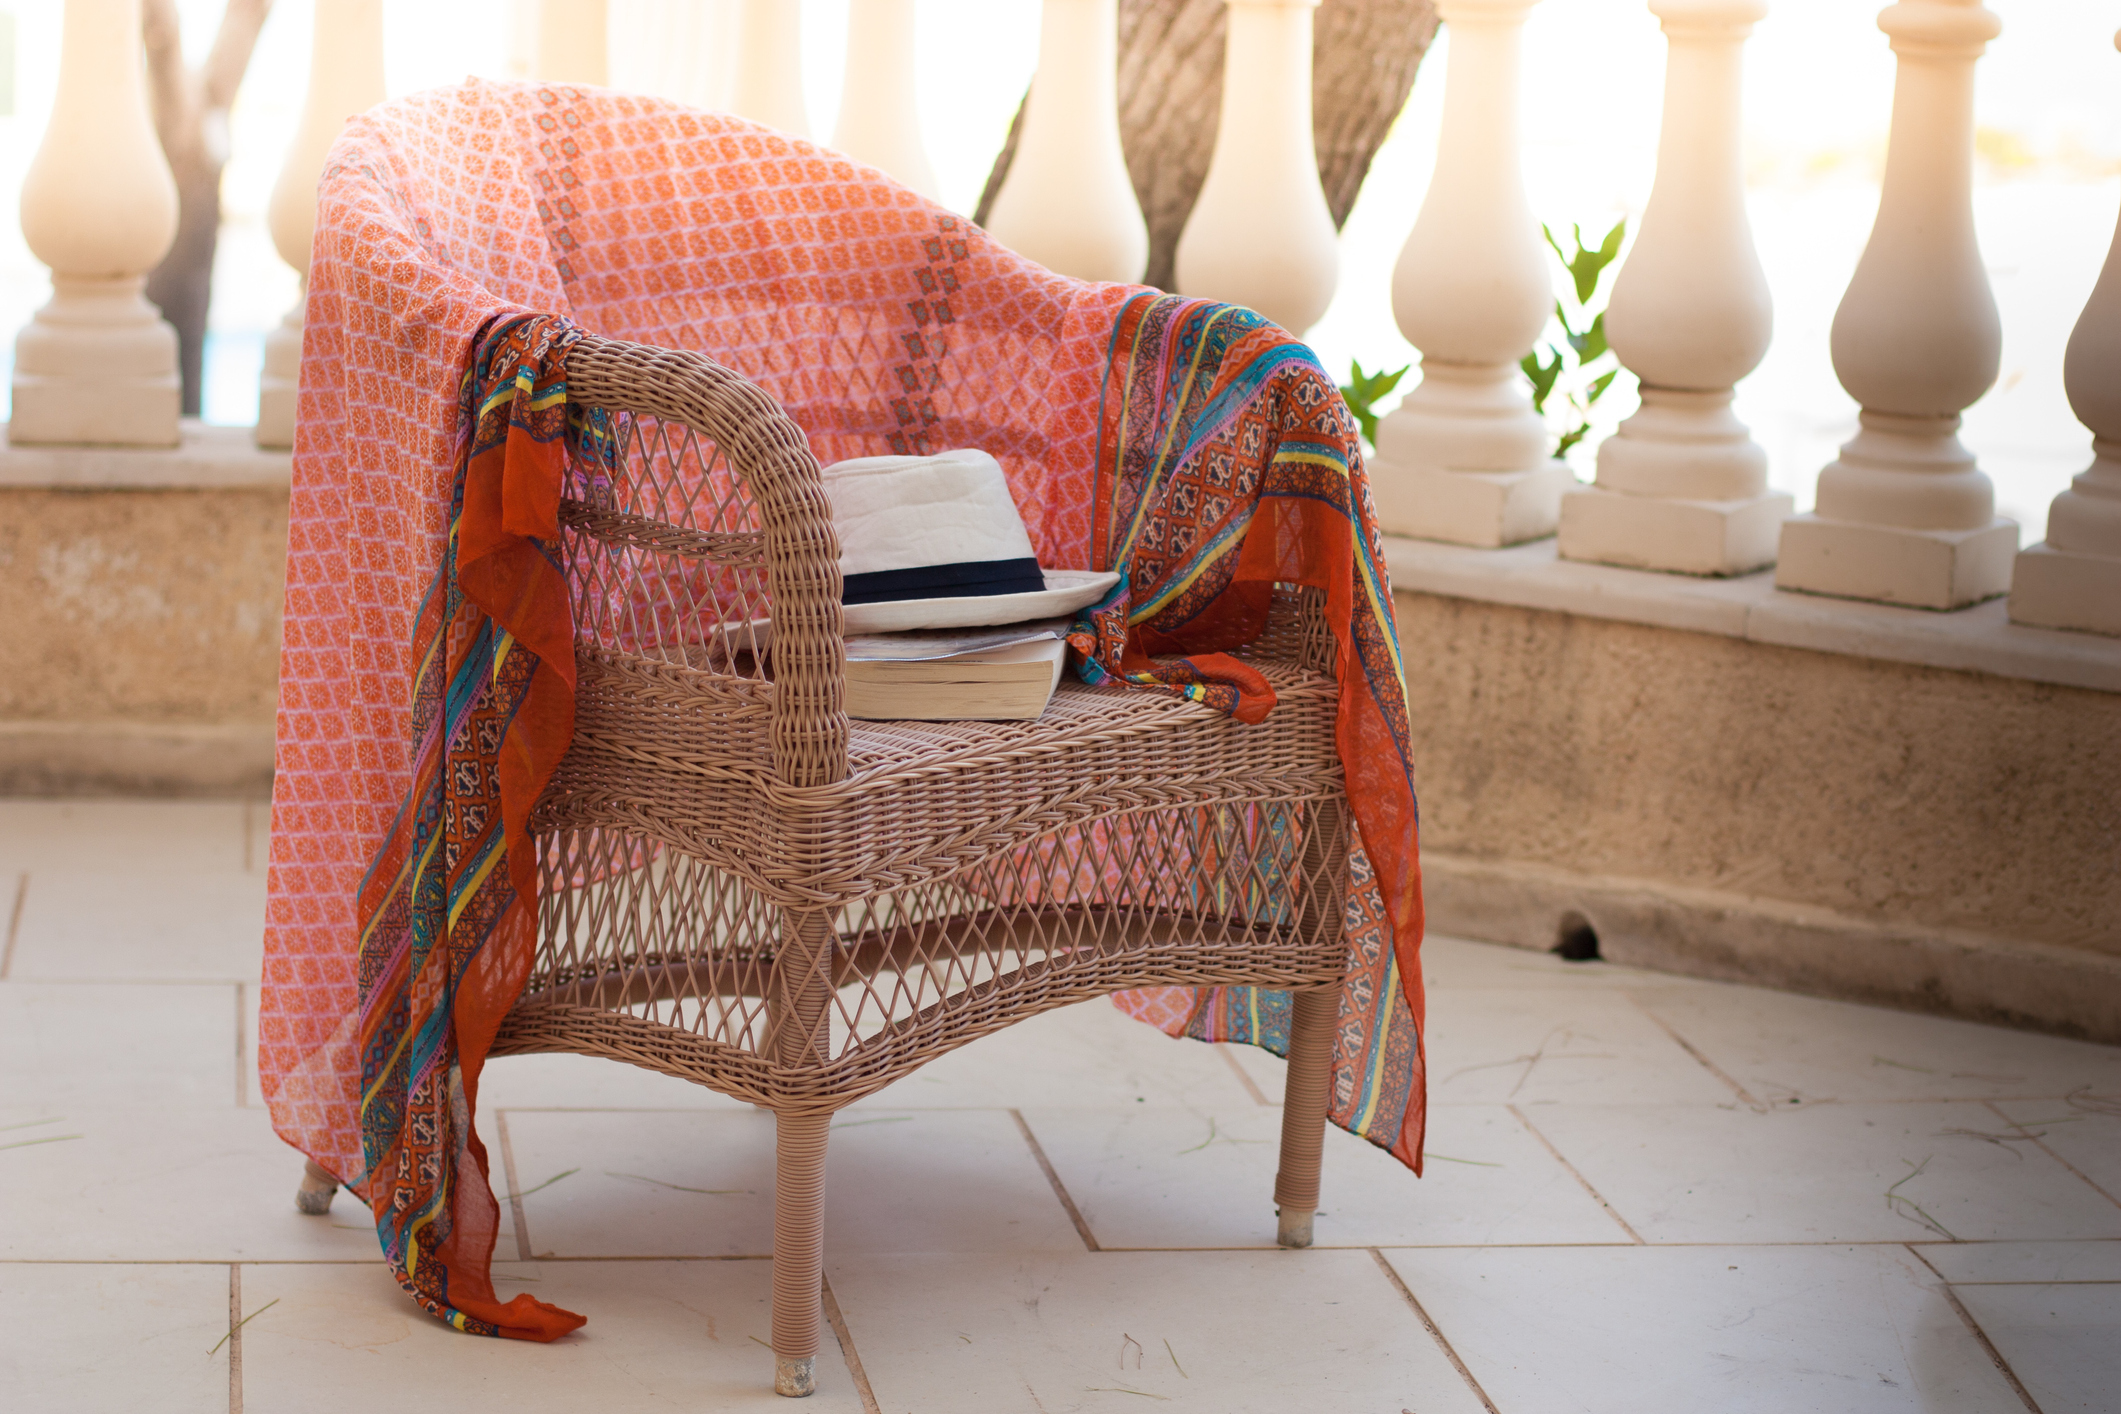 A wicker chair holding a book, a hat, and a blanket.